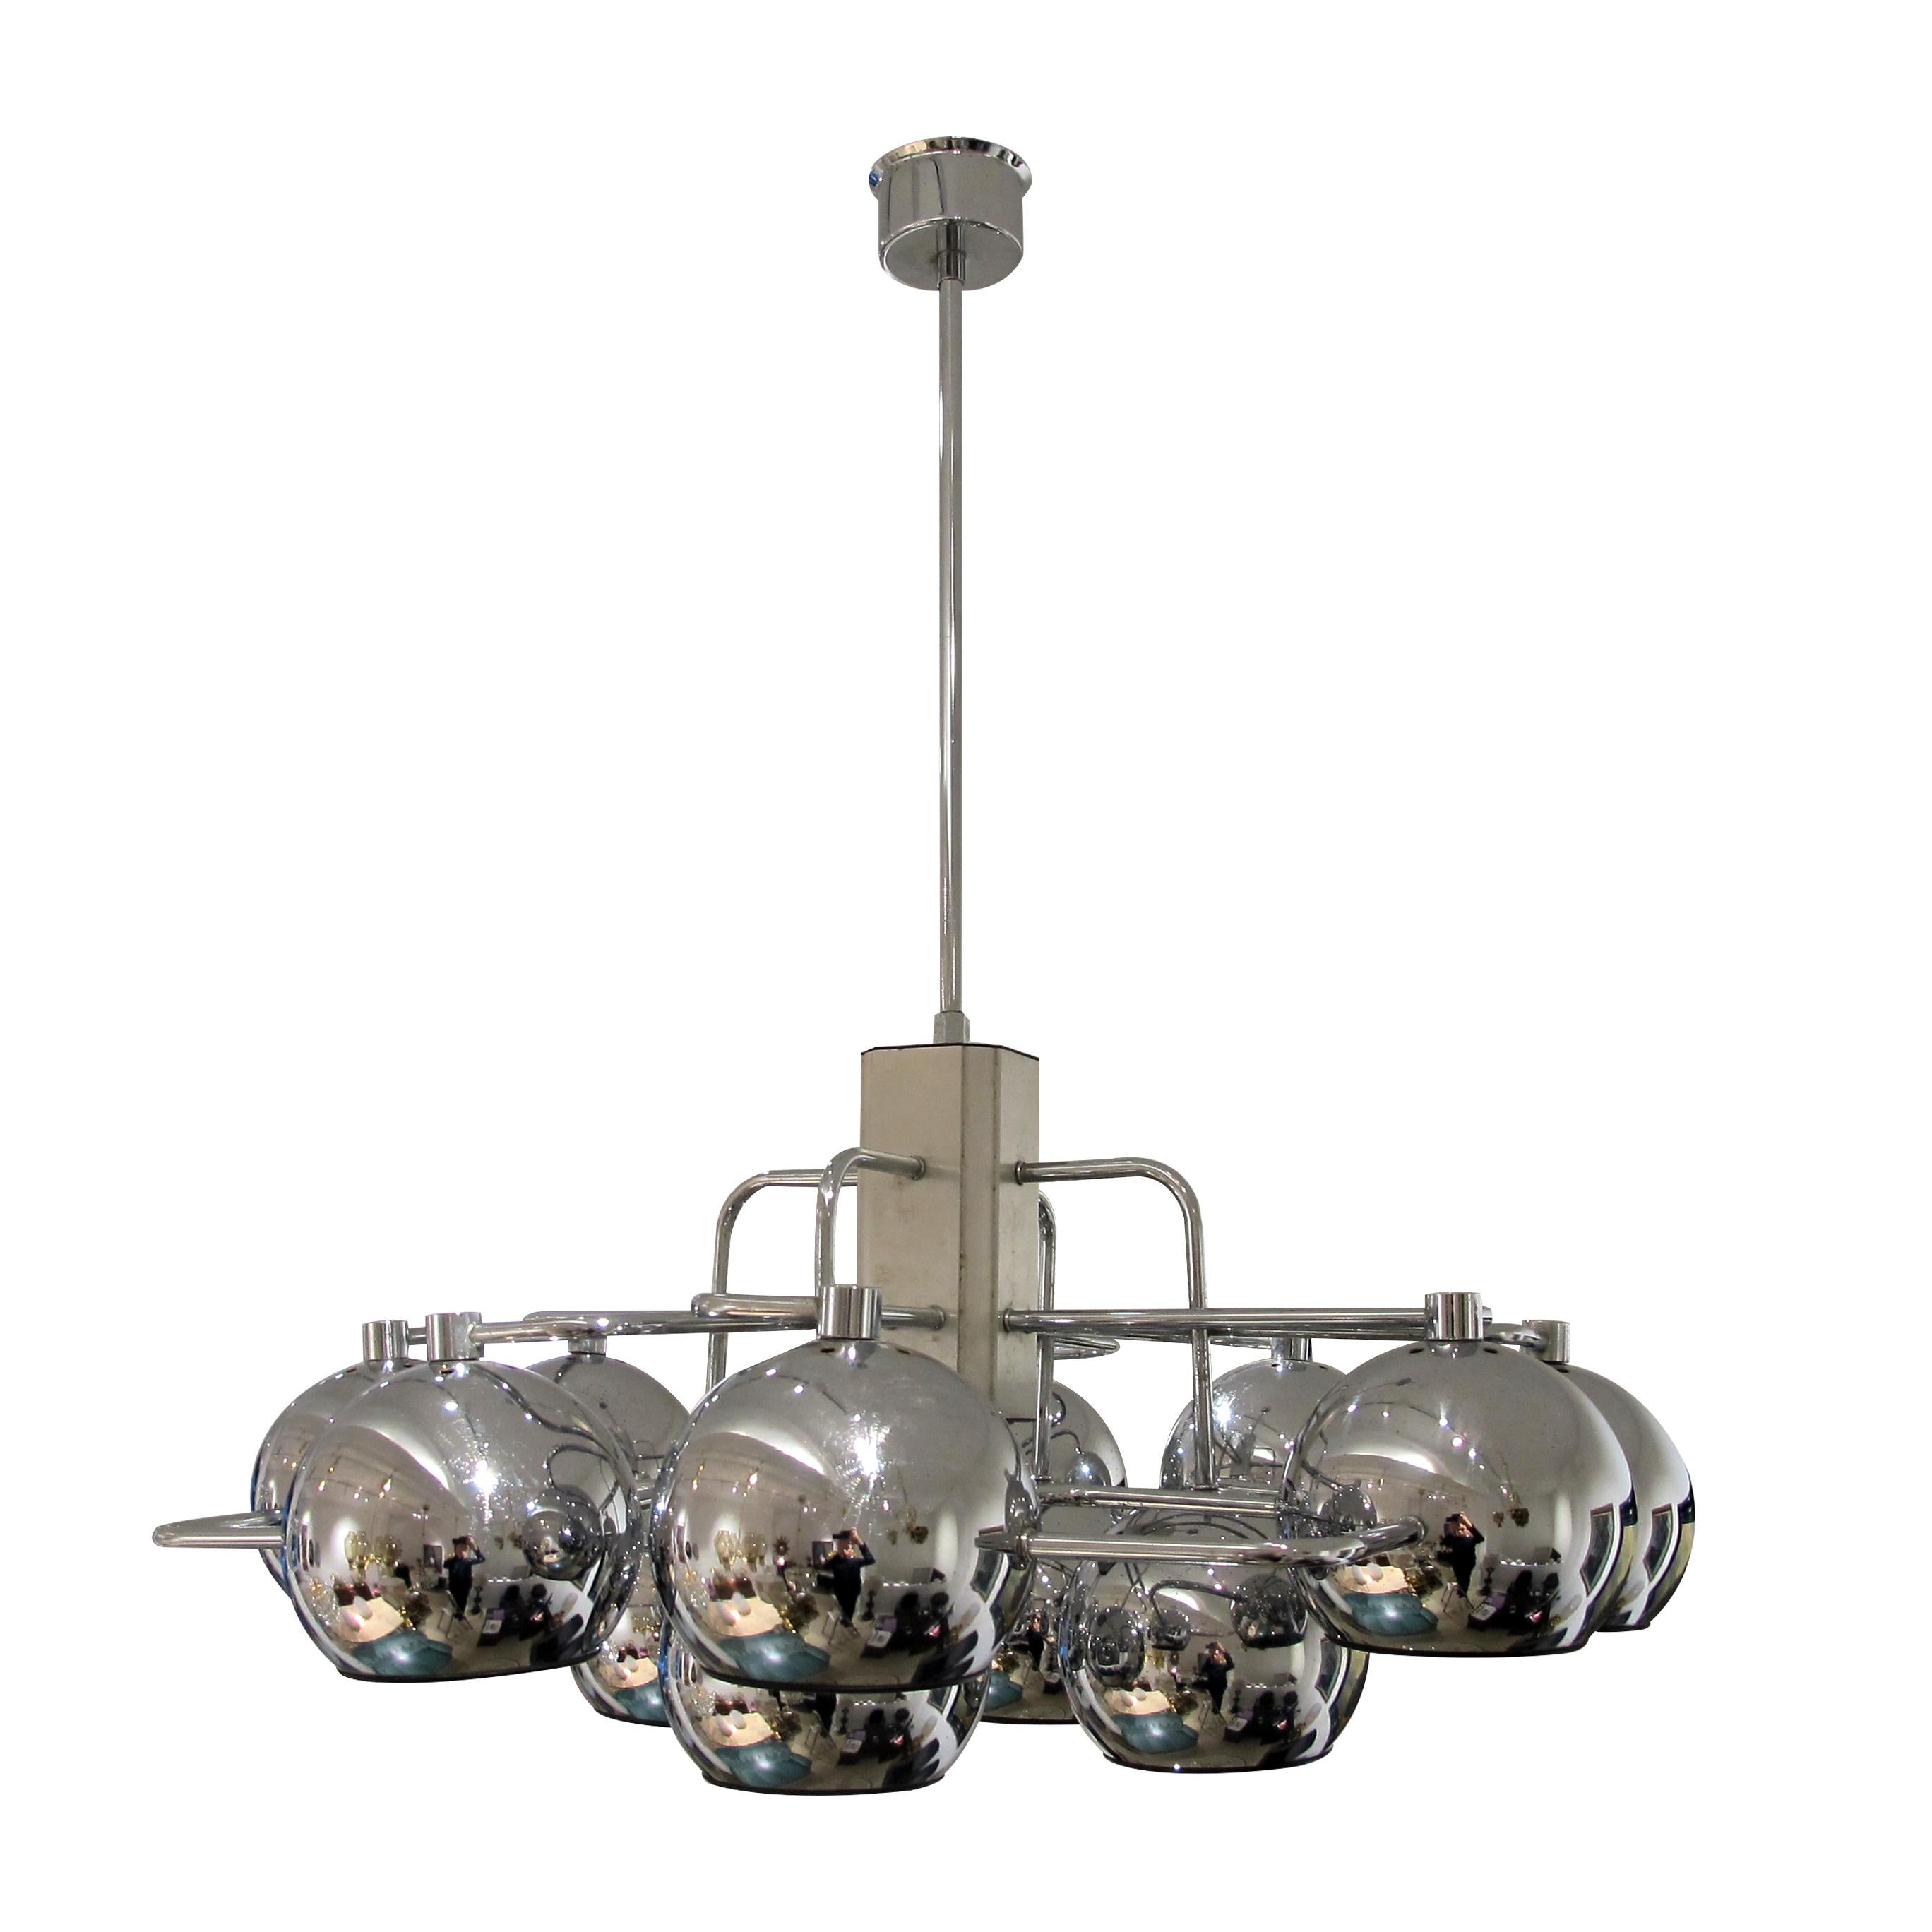 The 12 Chrome Globes Geometric Frame Ceiling Light designed by G. Sciolari in the 1960s is a masterpiece that encapsulates the essence of mid-century modern design. Its impeccable craftsmanship, striking geometric structure, and chrome-plated globes